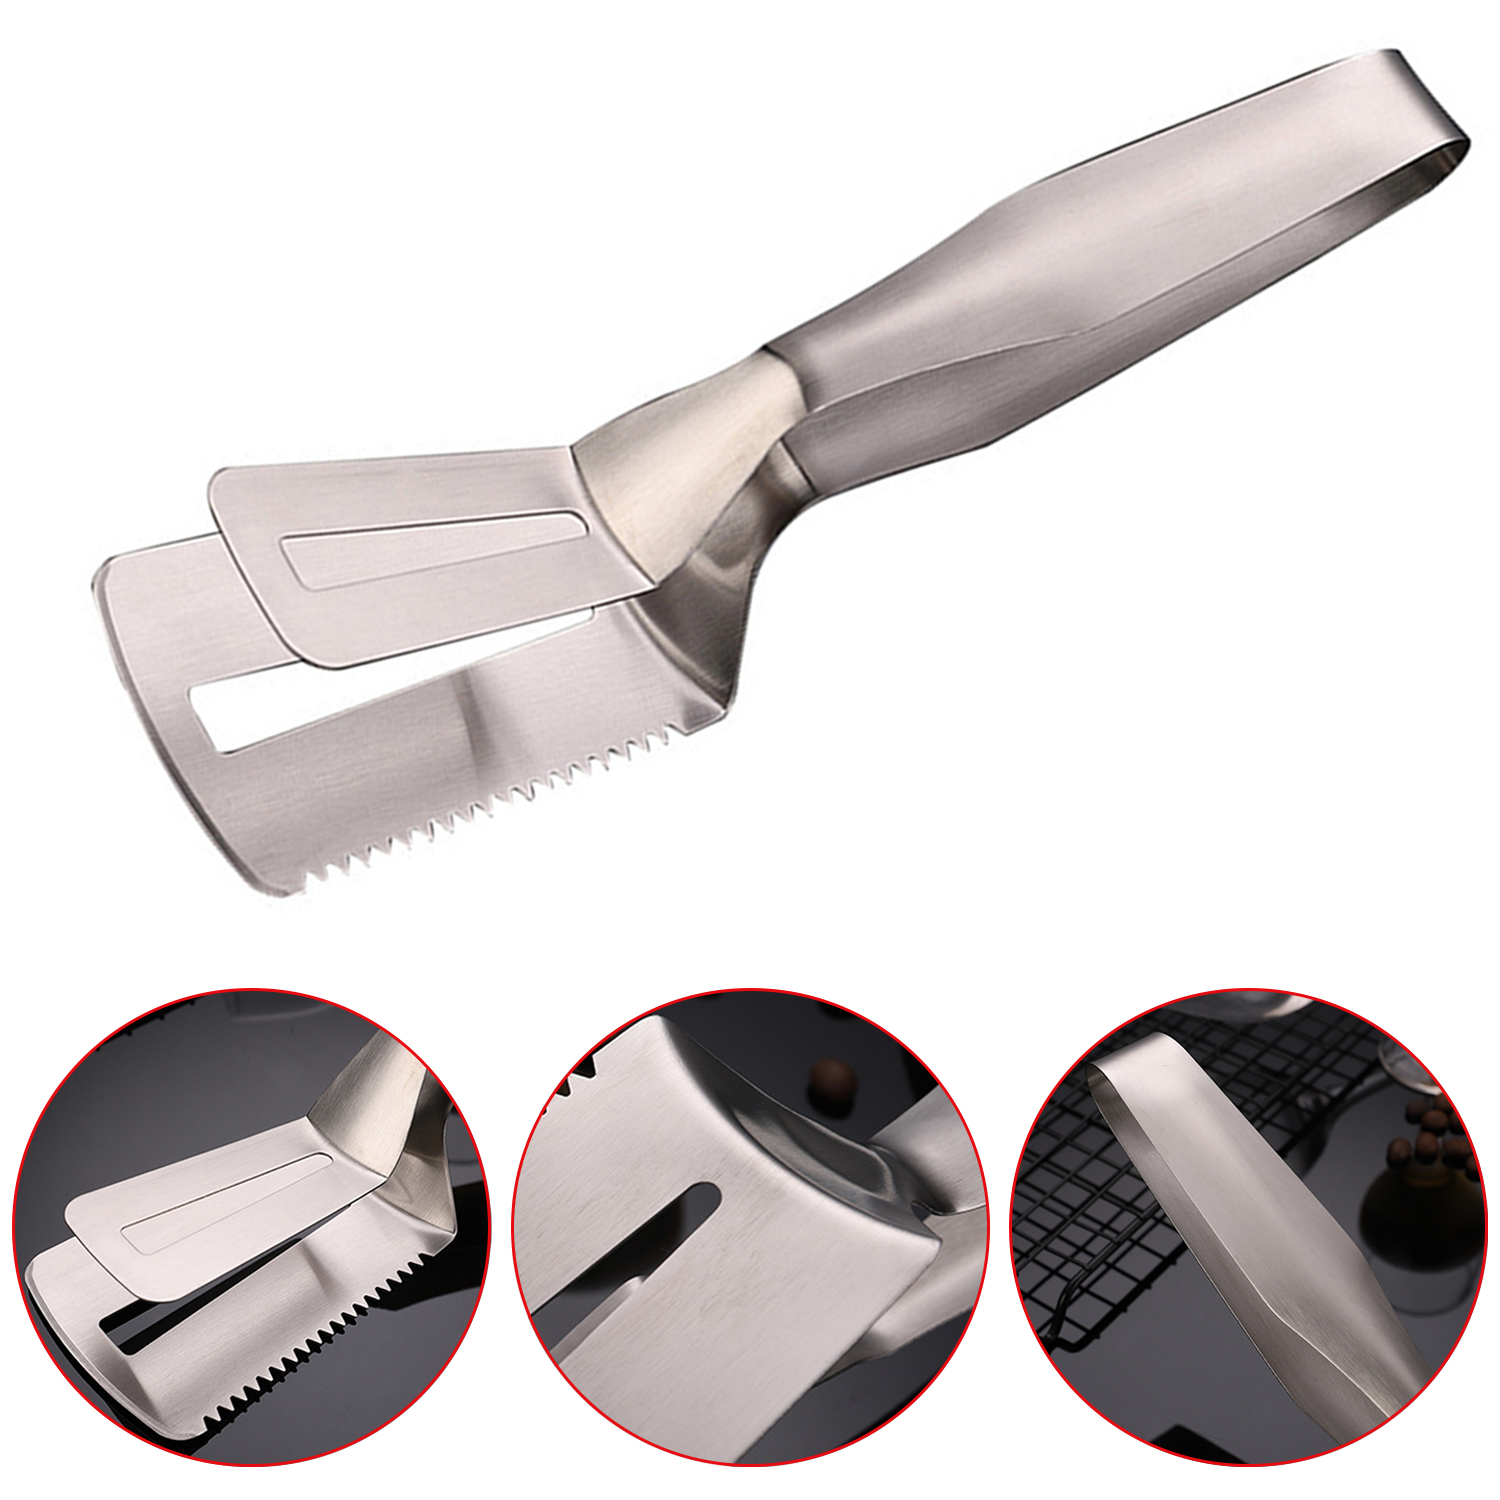 Stainless Steel Barbecue Clamp Frying Steak Fried Fish Clip Tong BBQ Non-Stick Barbecue Grilling Camping BBQ Kitchen Tools